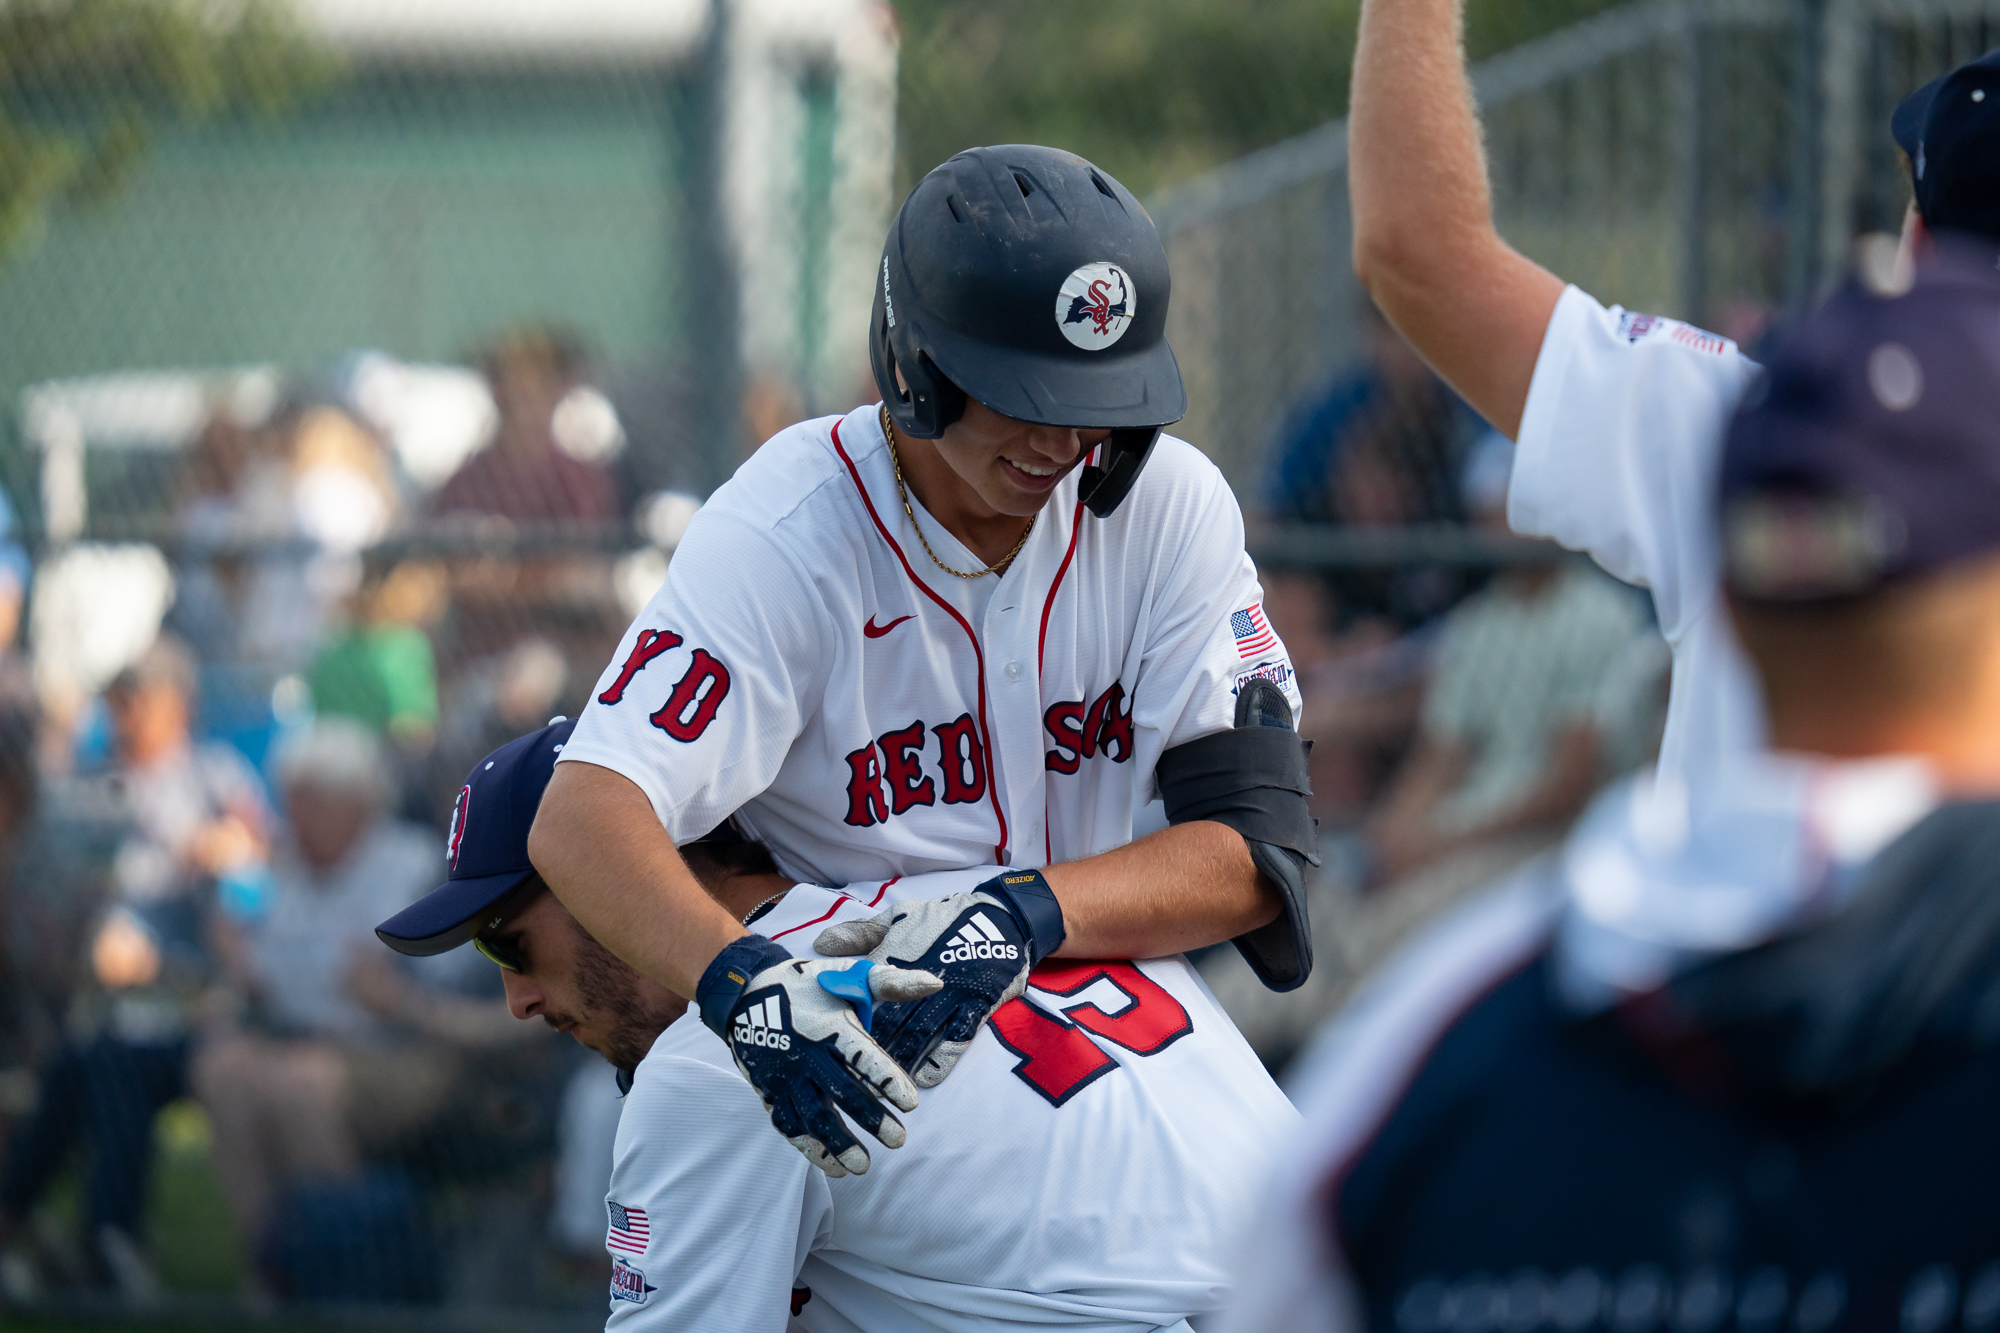 Hines and Gleed Homer as Red Sox Win Third Against Brewster - YARMOUTH